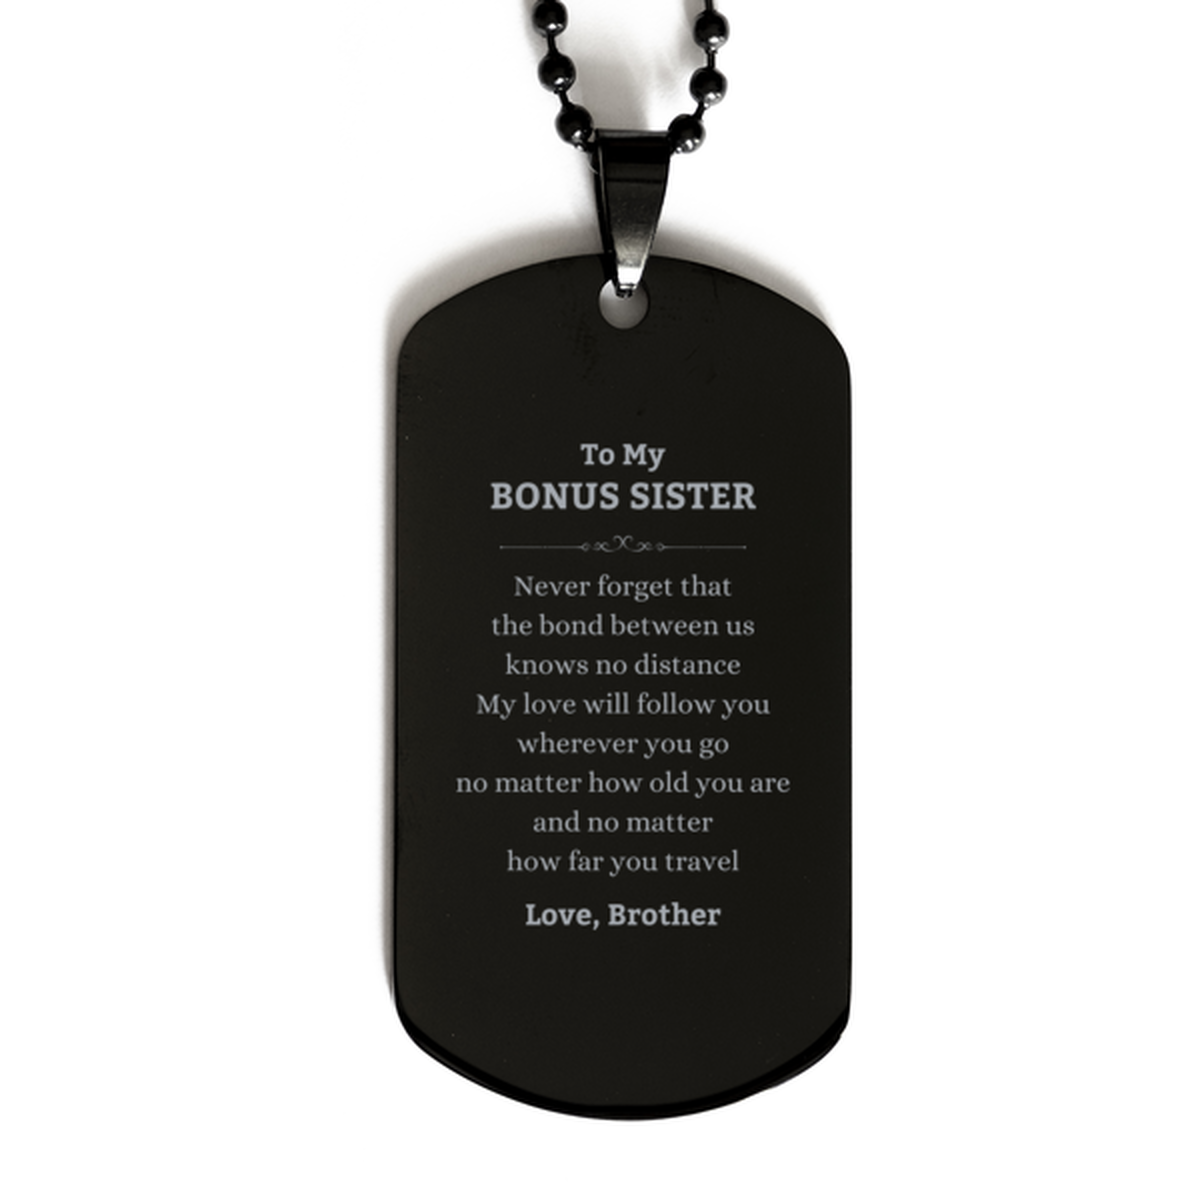 Bonus Sister Birthday Gifts from Brother, Adjustable Black Dog Tag for Bonus Sister Christmas Graduation Unique Gifts Bonus Sister Never forget that the bond between us knows no distance. Love, Brother